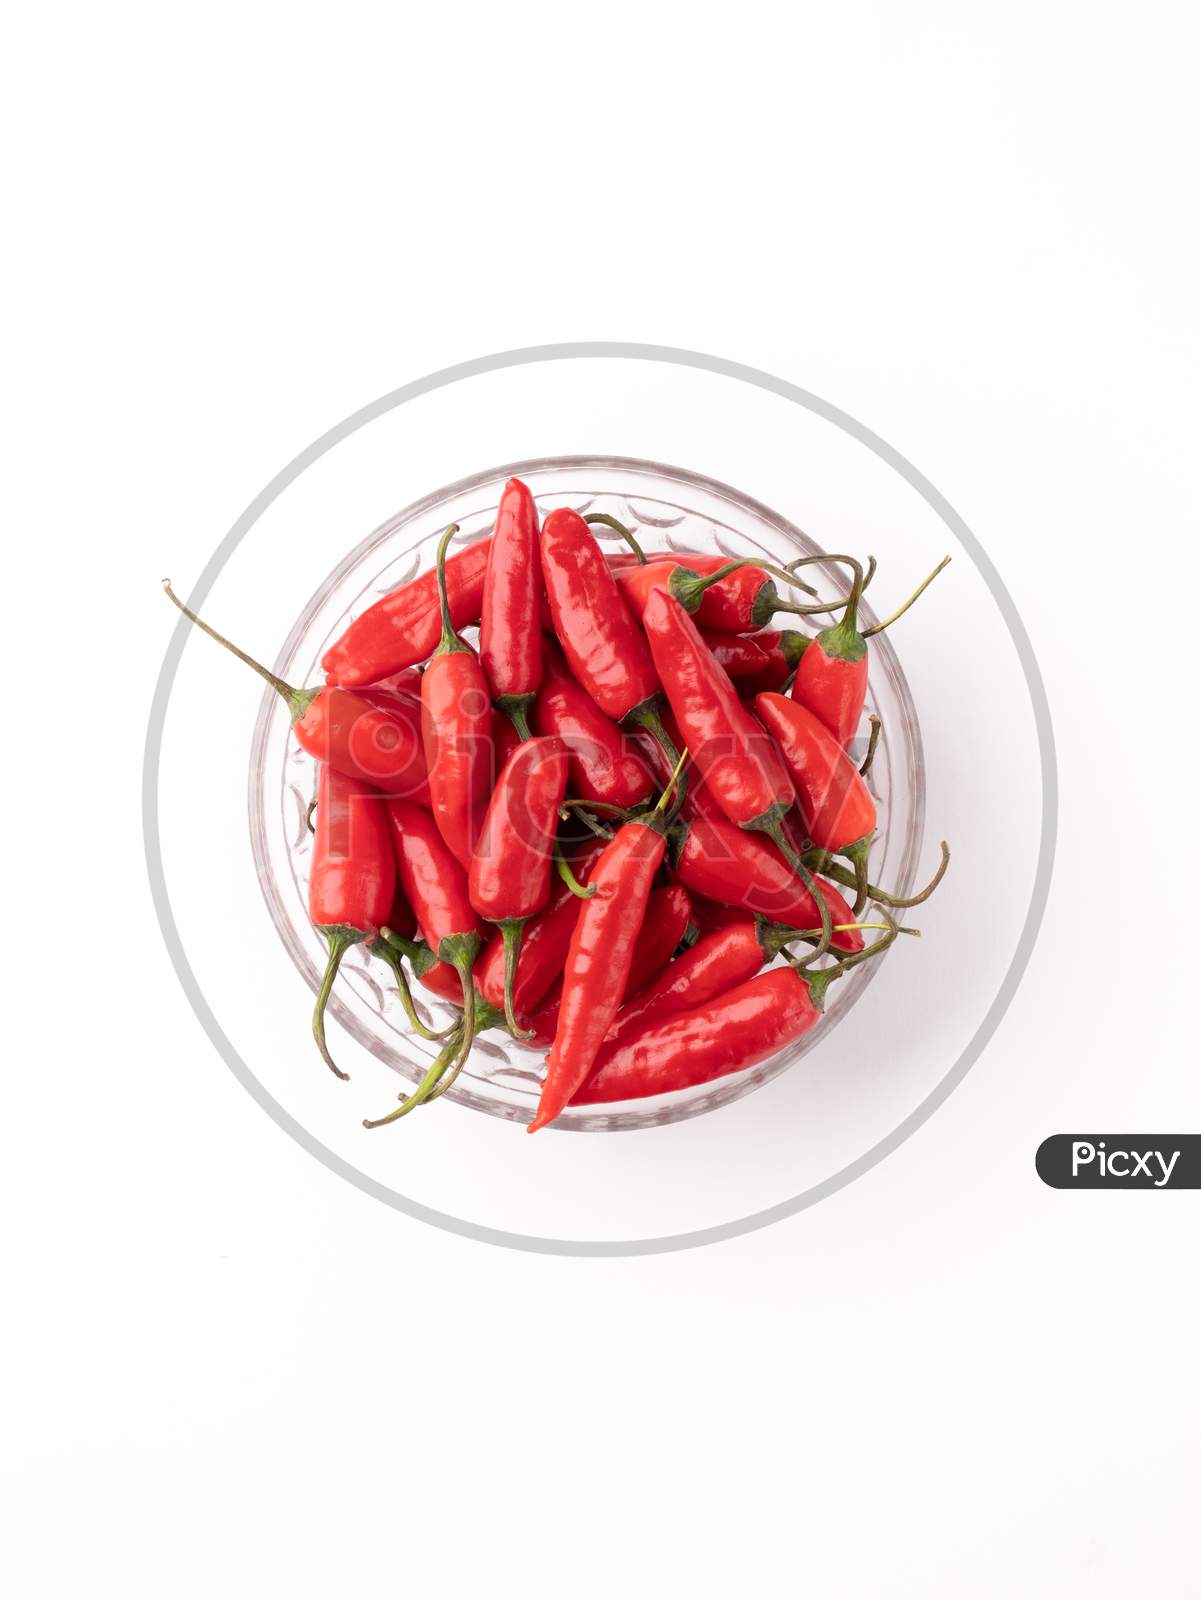 Fresh Red Chili with white background stock image.